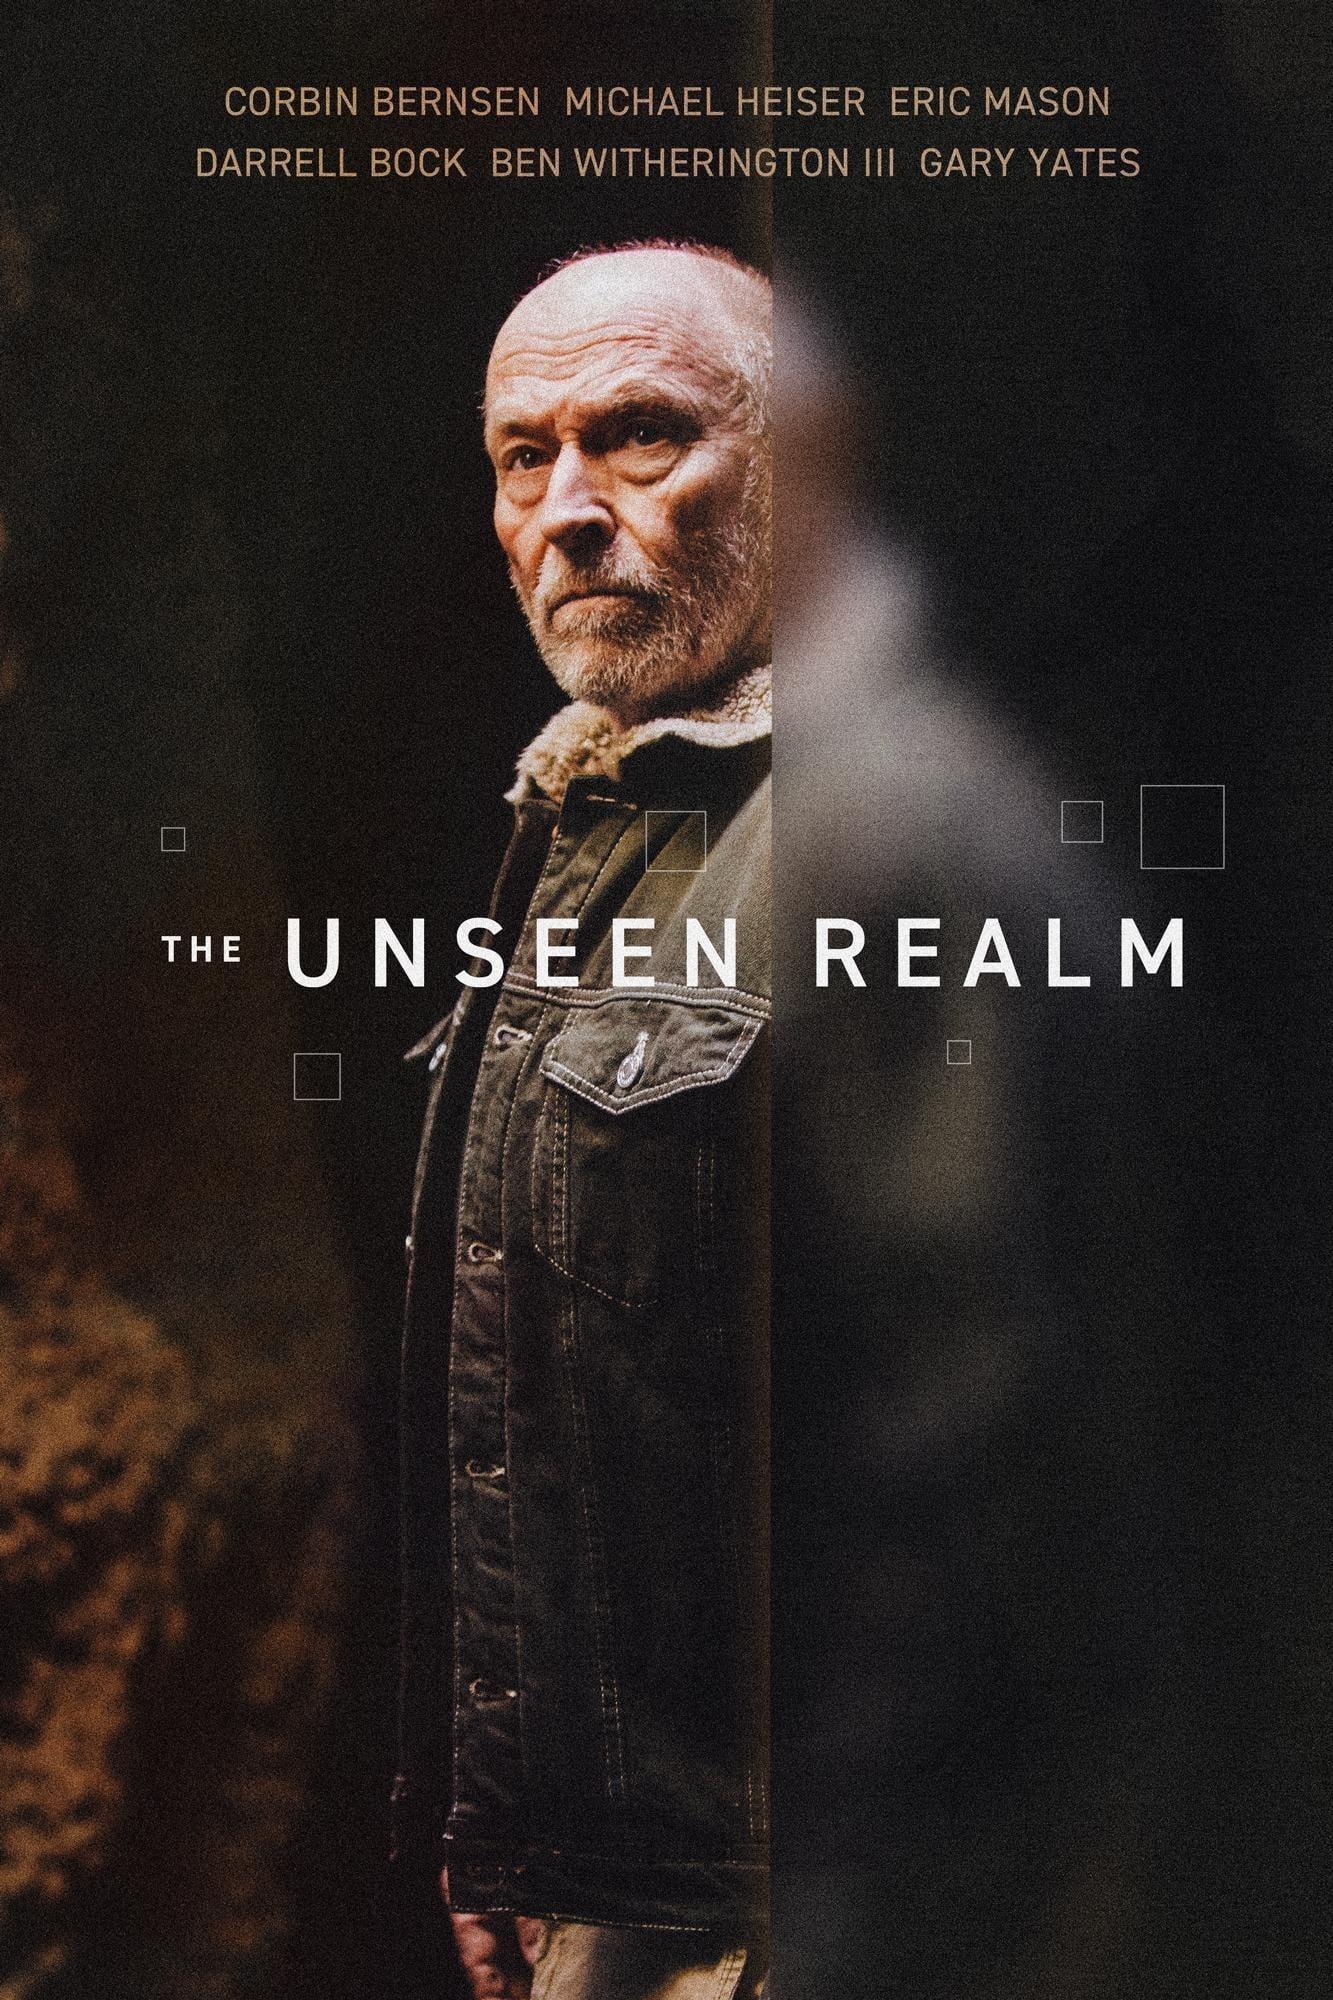 The Unseen Realm poster